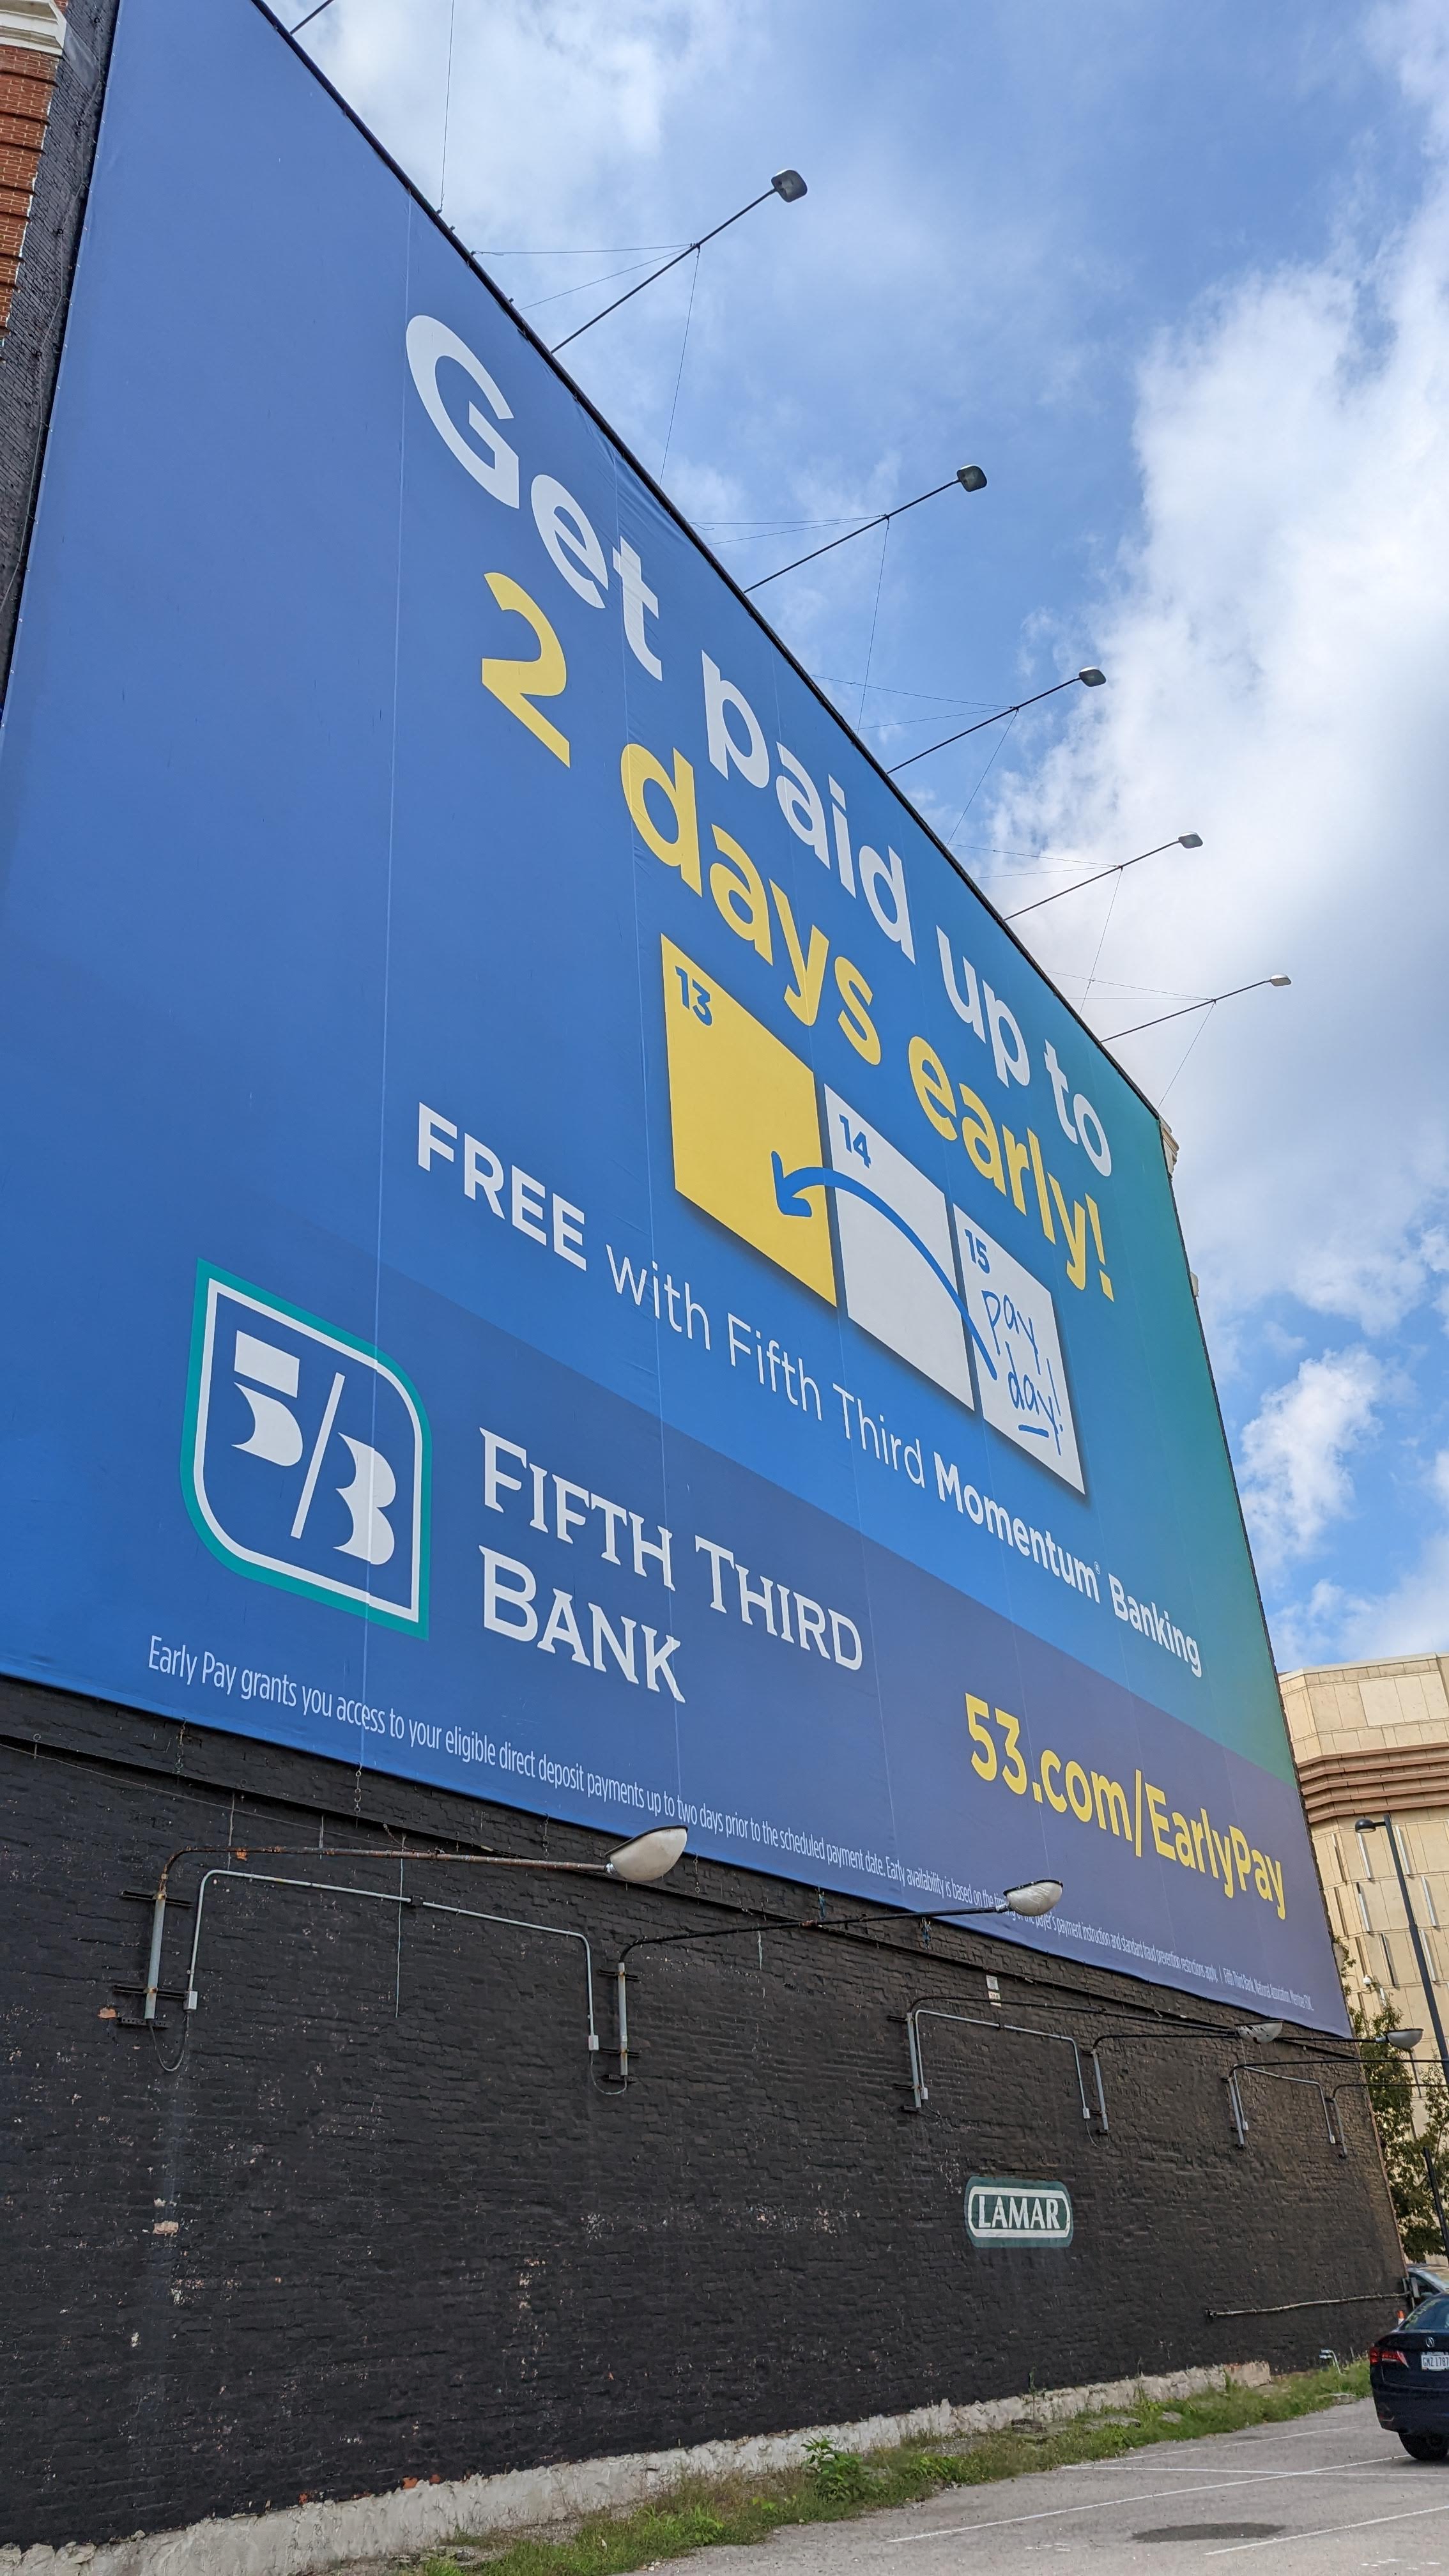 Blue billboard from the bank 5/3rd advertising a product that allows you to get paid two days early